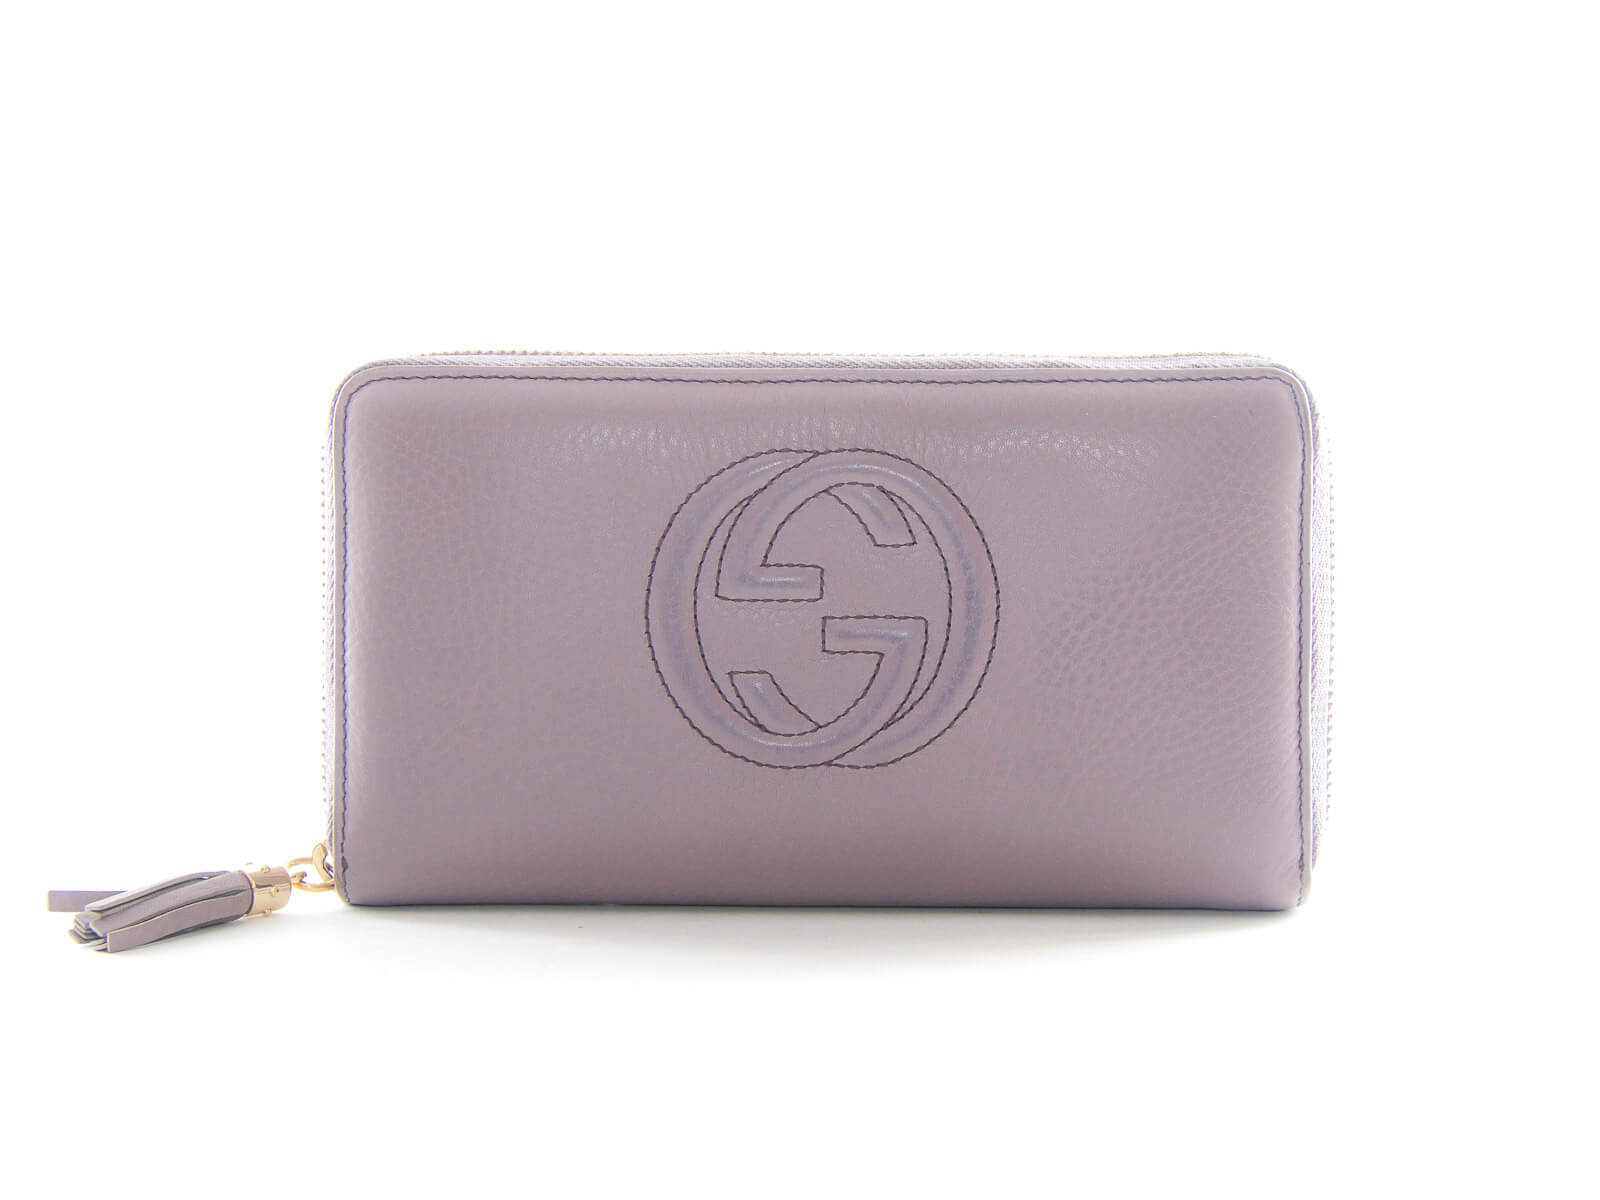 Authentic Gucci GG logo Soho lavender leather zip around wallet ...